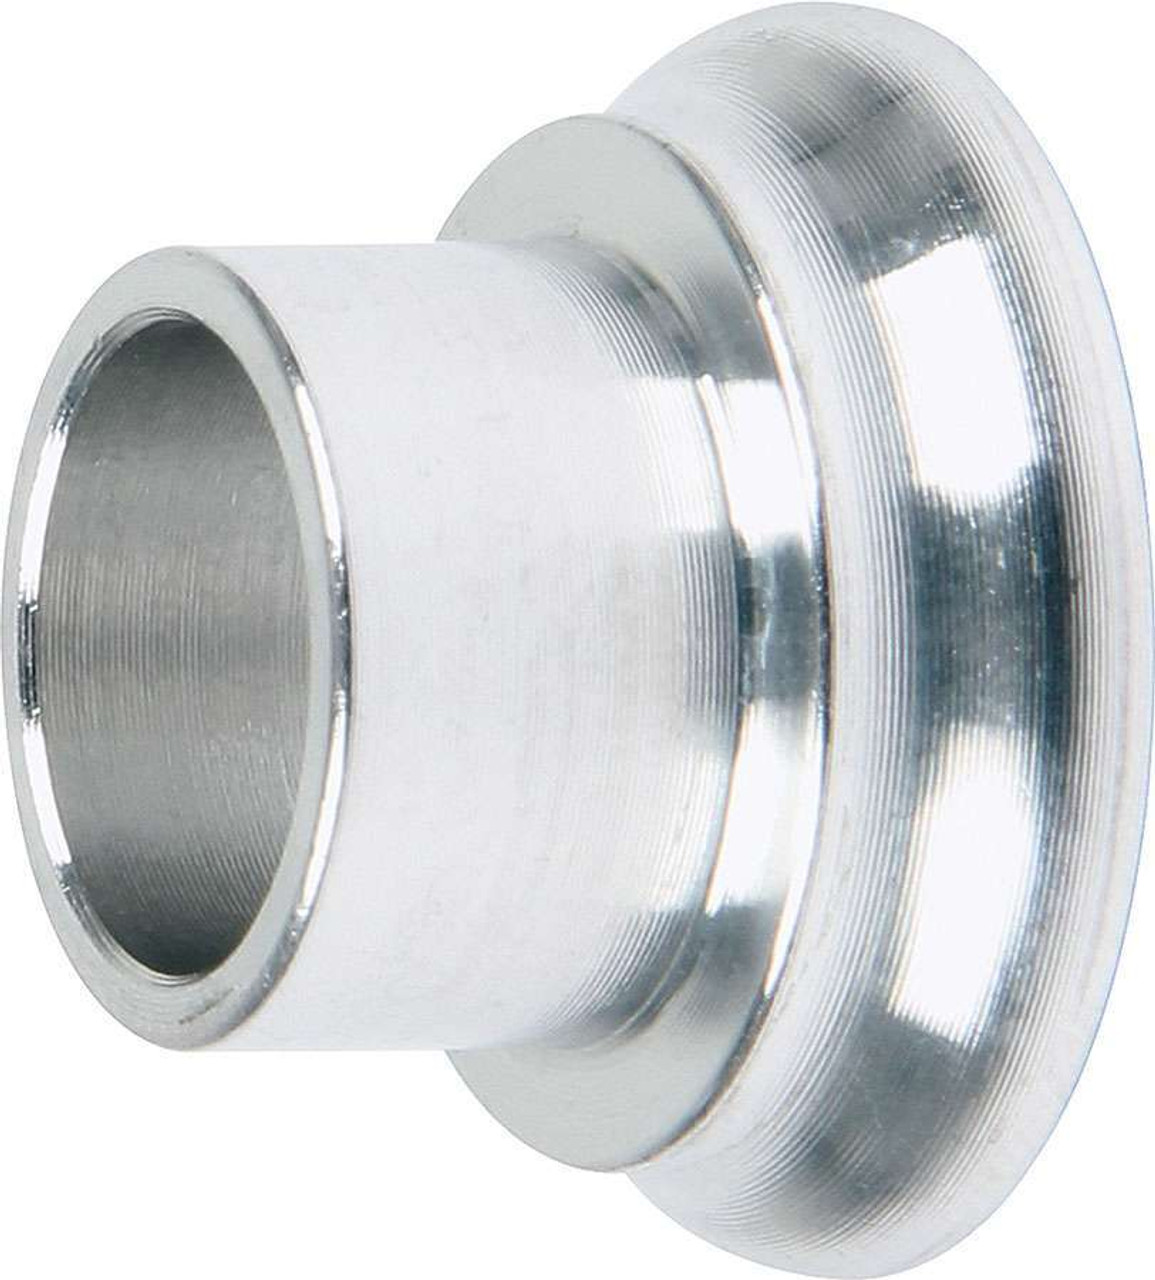 Reducer Spacers 5/8 to 1/2 x 1/4 Alum